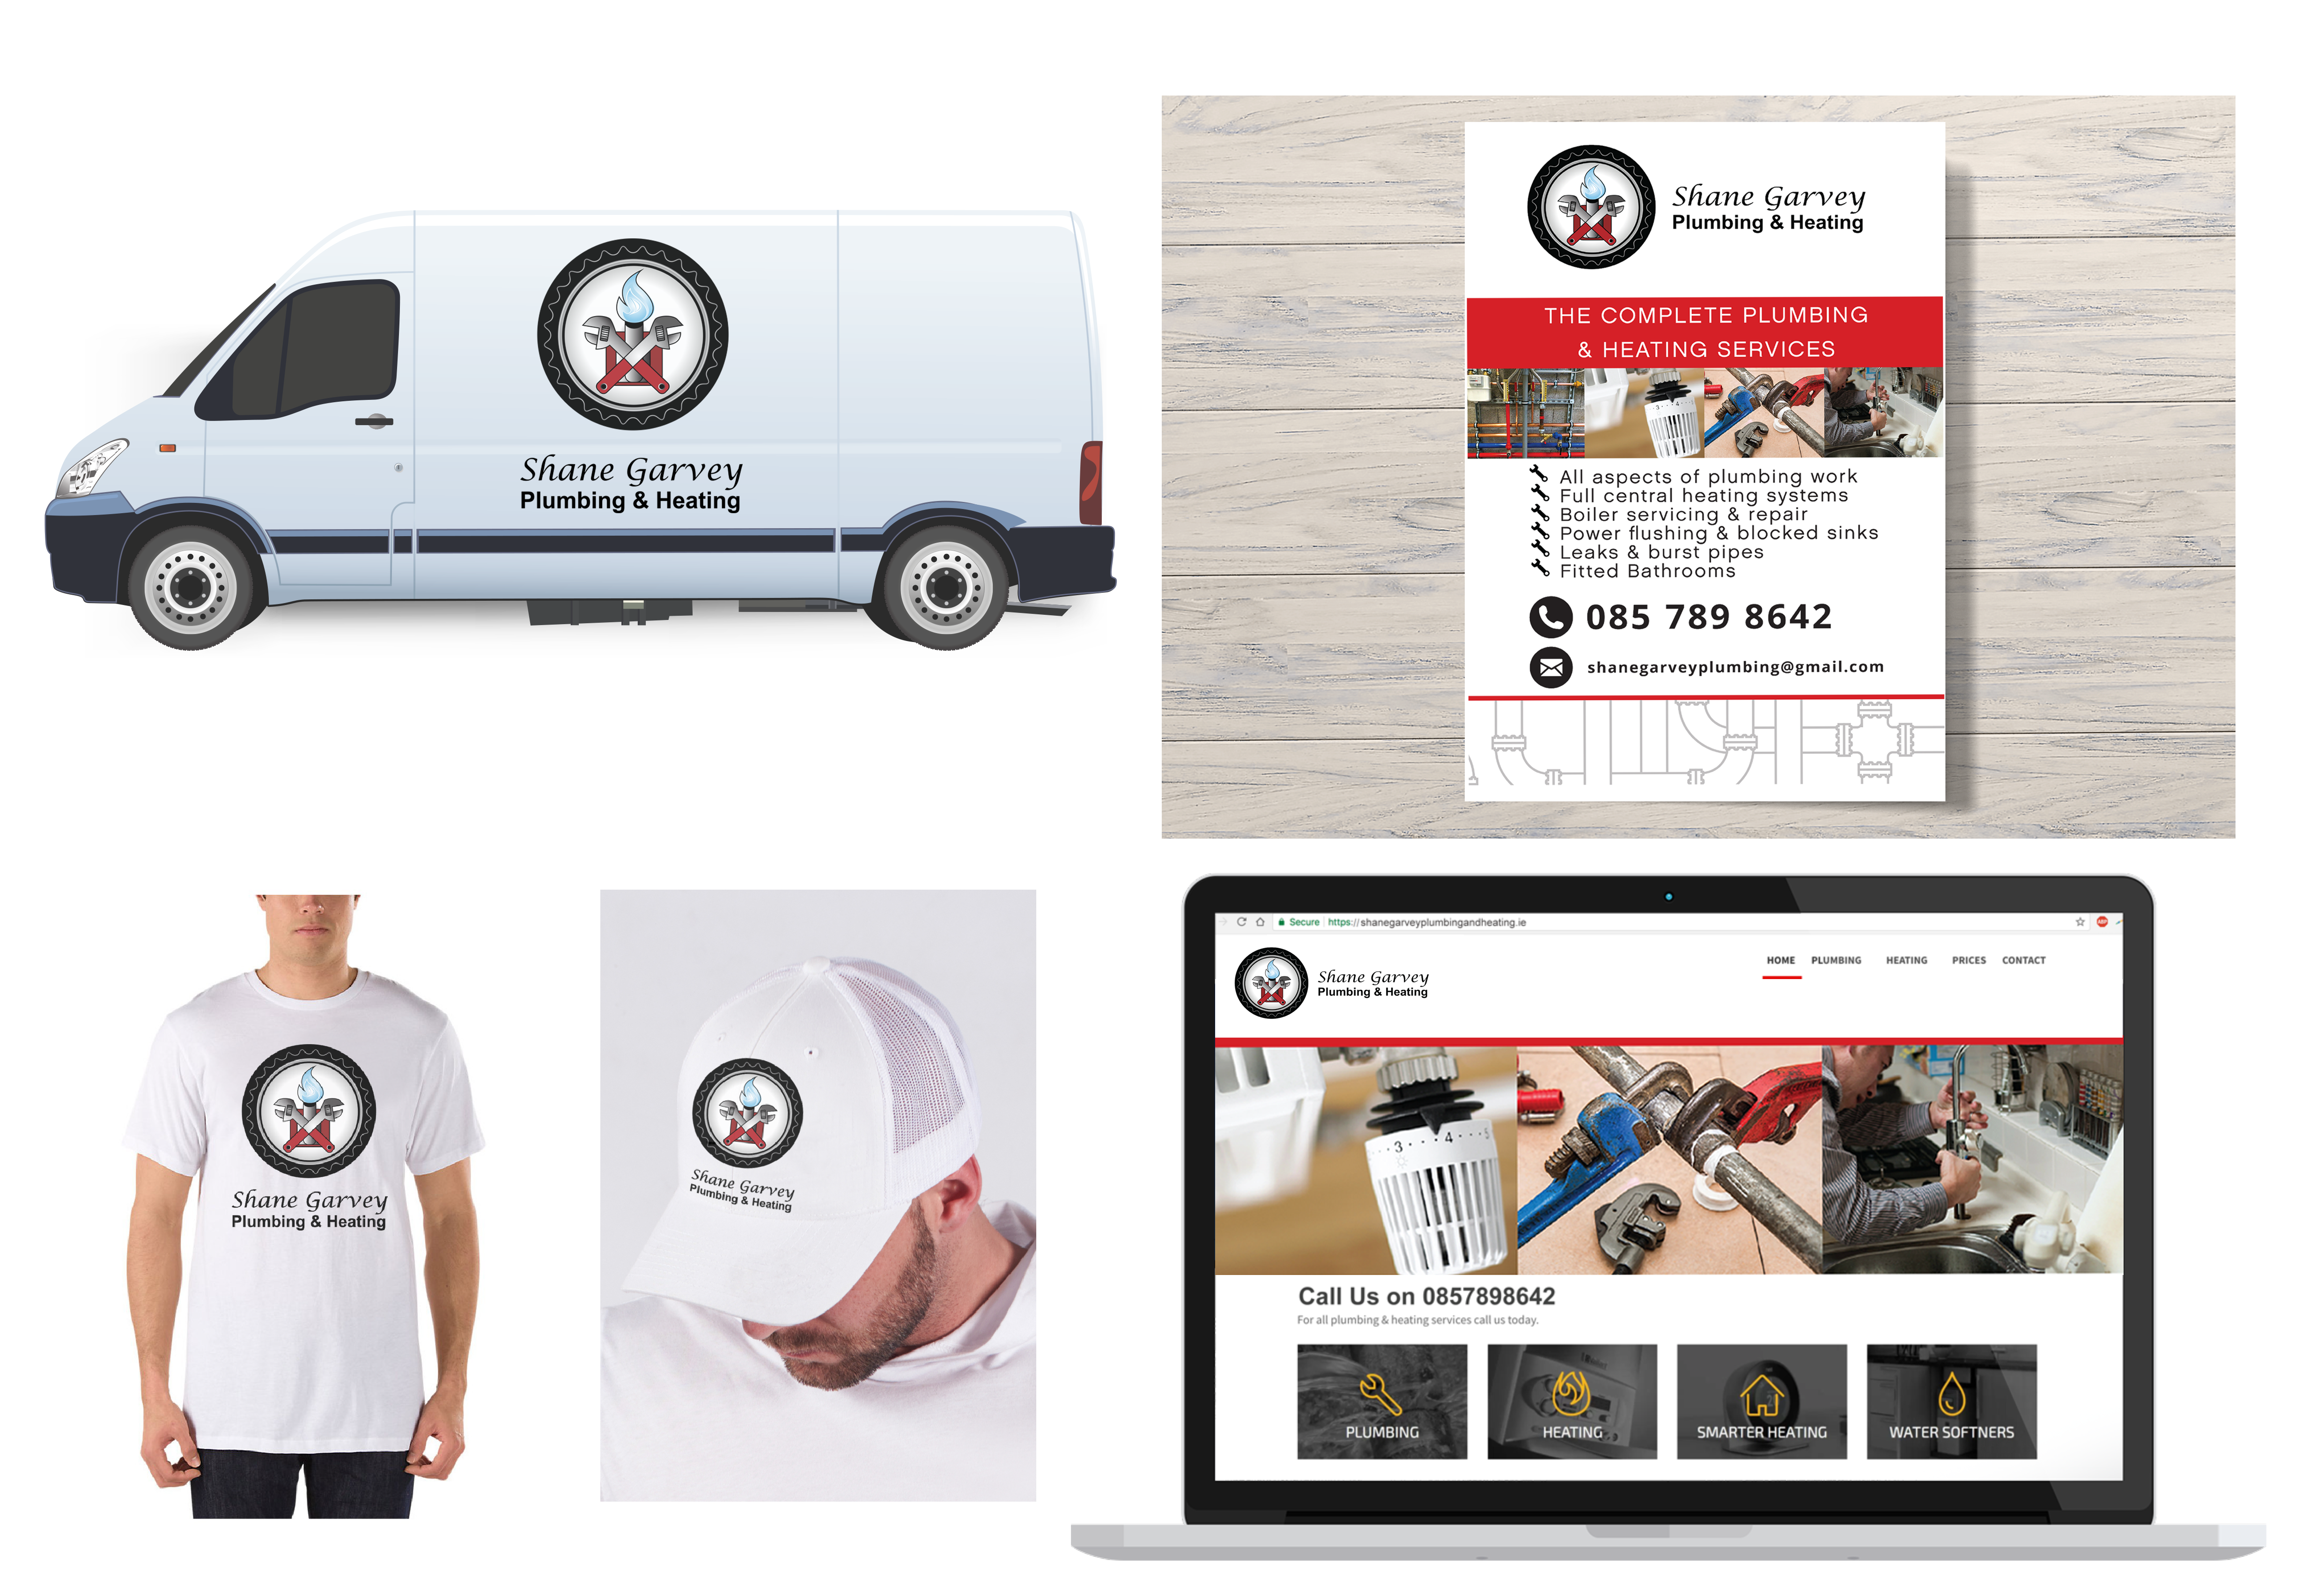 Promotional materials plumbing company